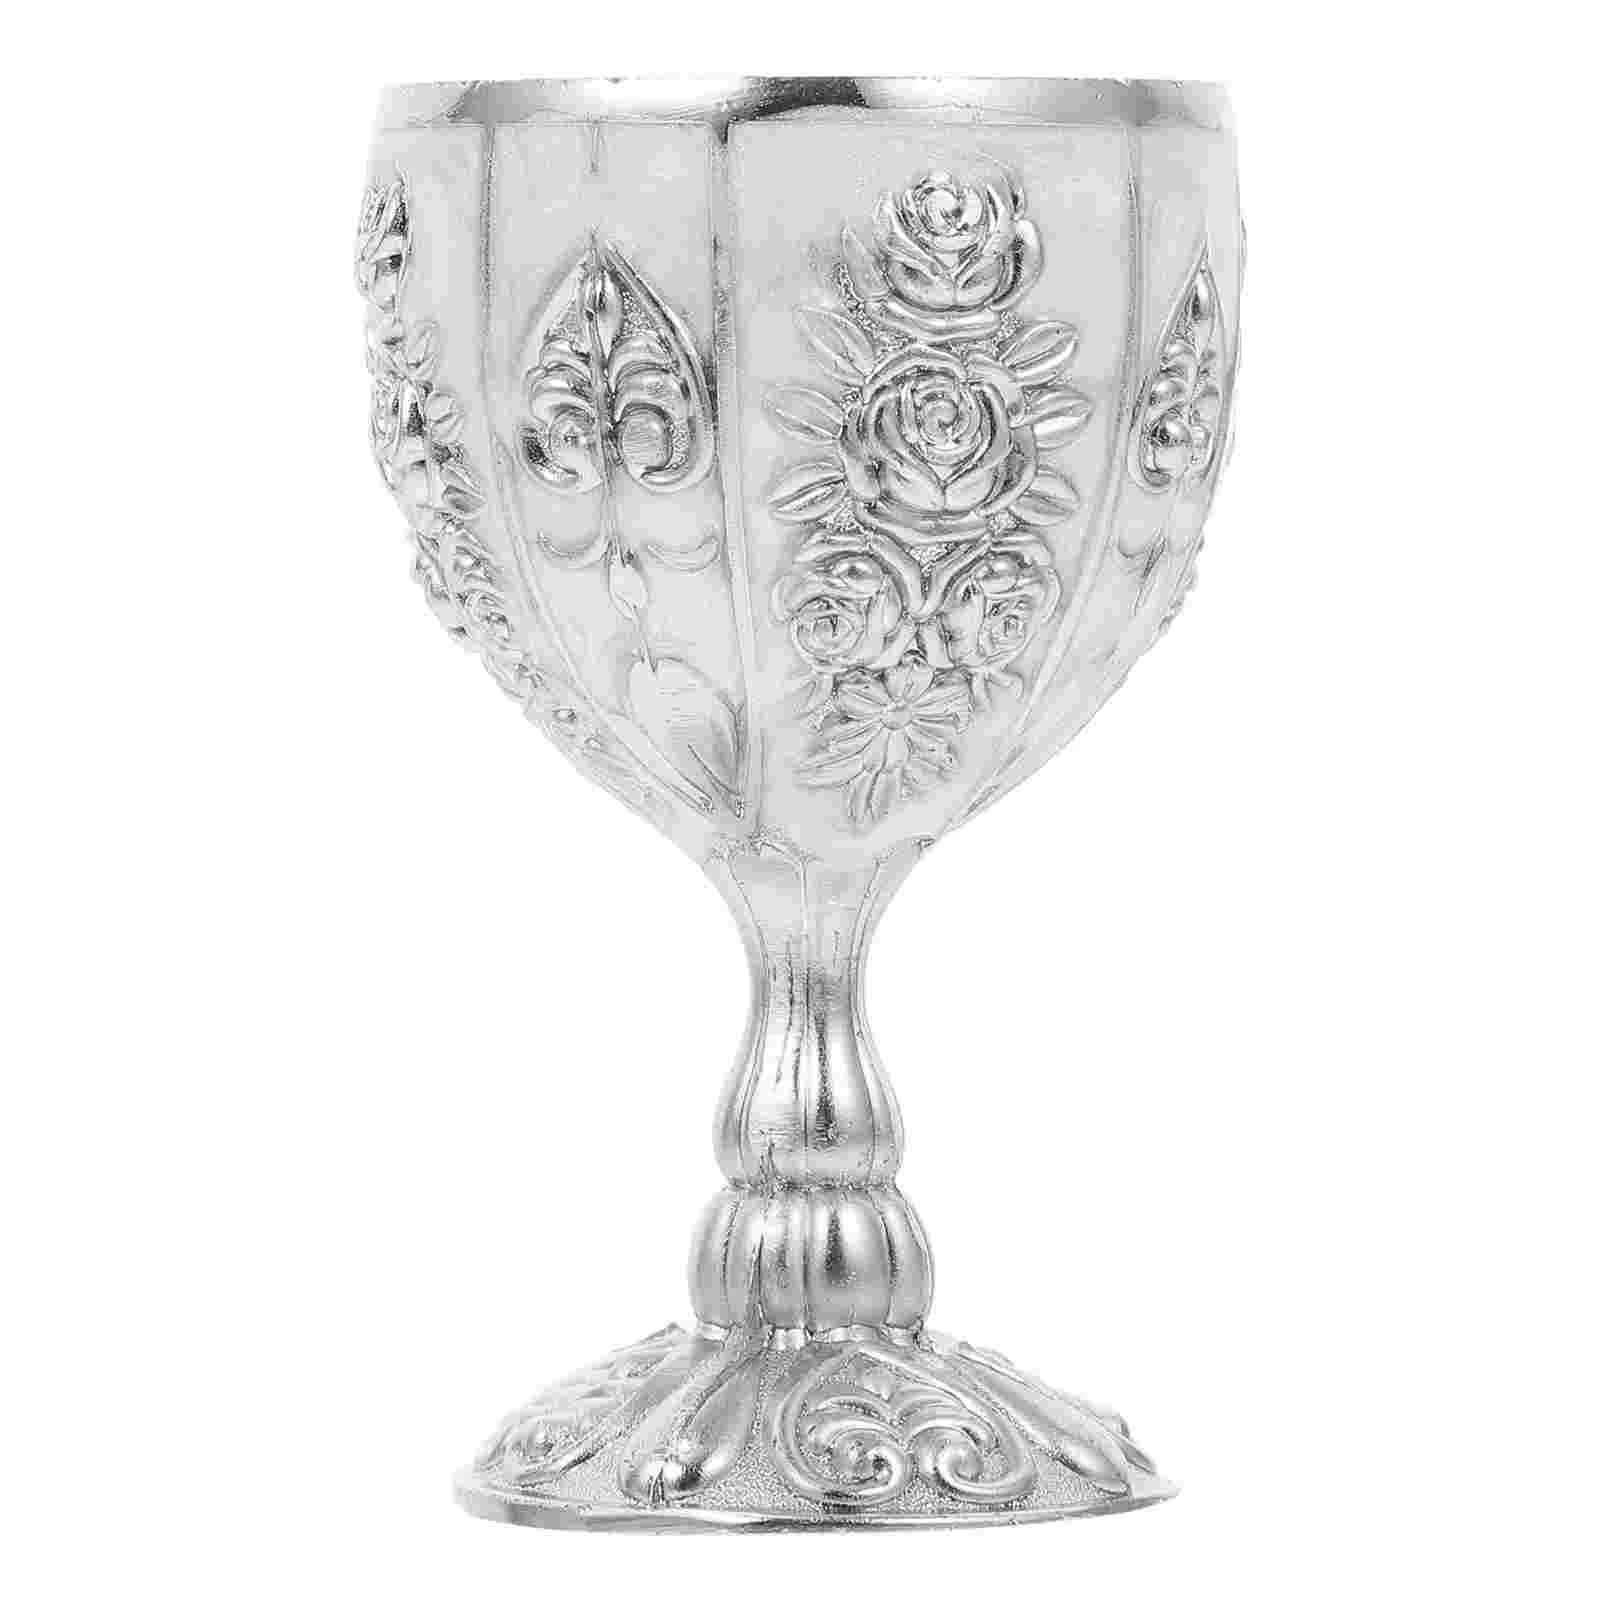 

Cup Goblet Chalice Glasses Vintage Cups Metal Medieval Retro European Champagne Cocktail Shot Royal Drinking Goblets Style